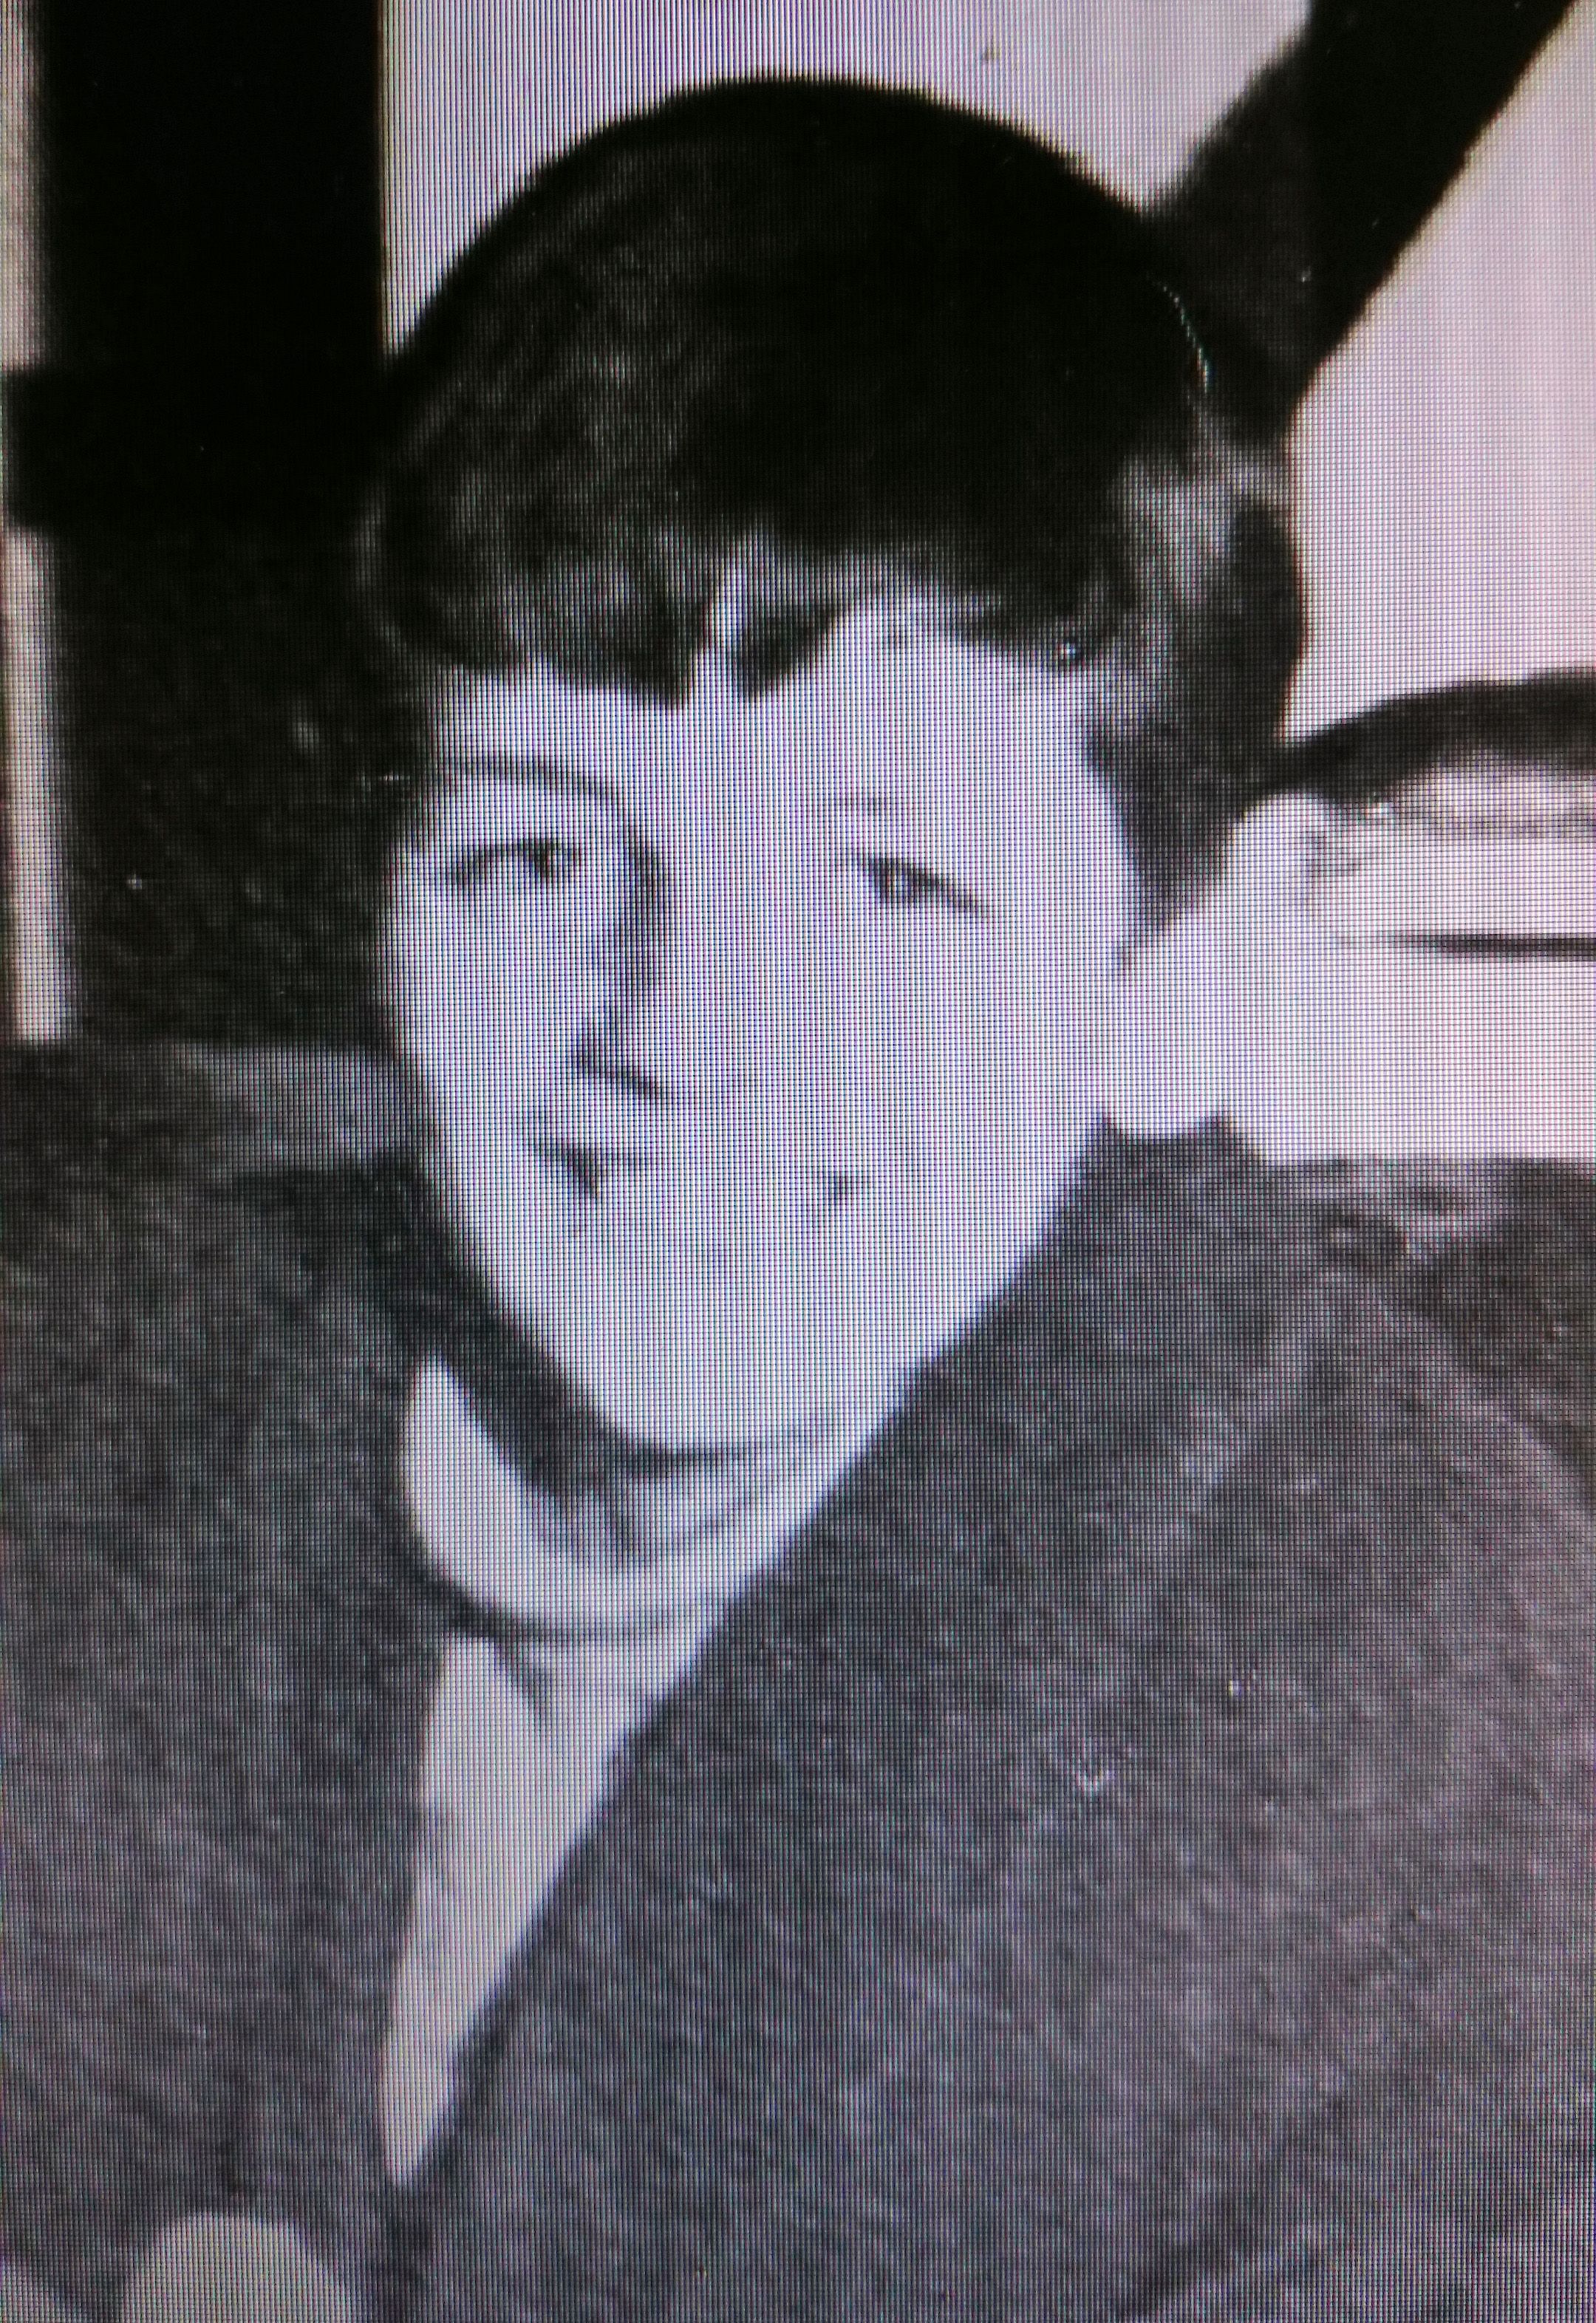 YOUTHFUL: Patrick Crawford was shot dead August 10 1975